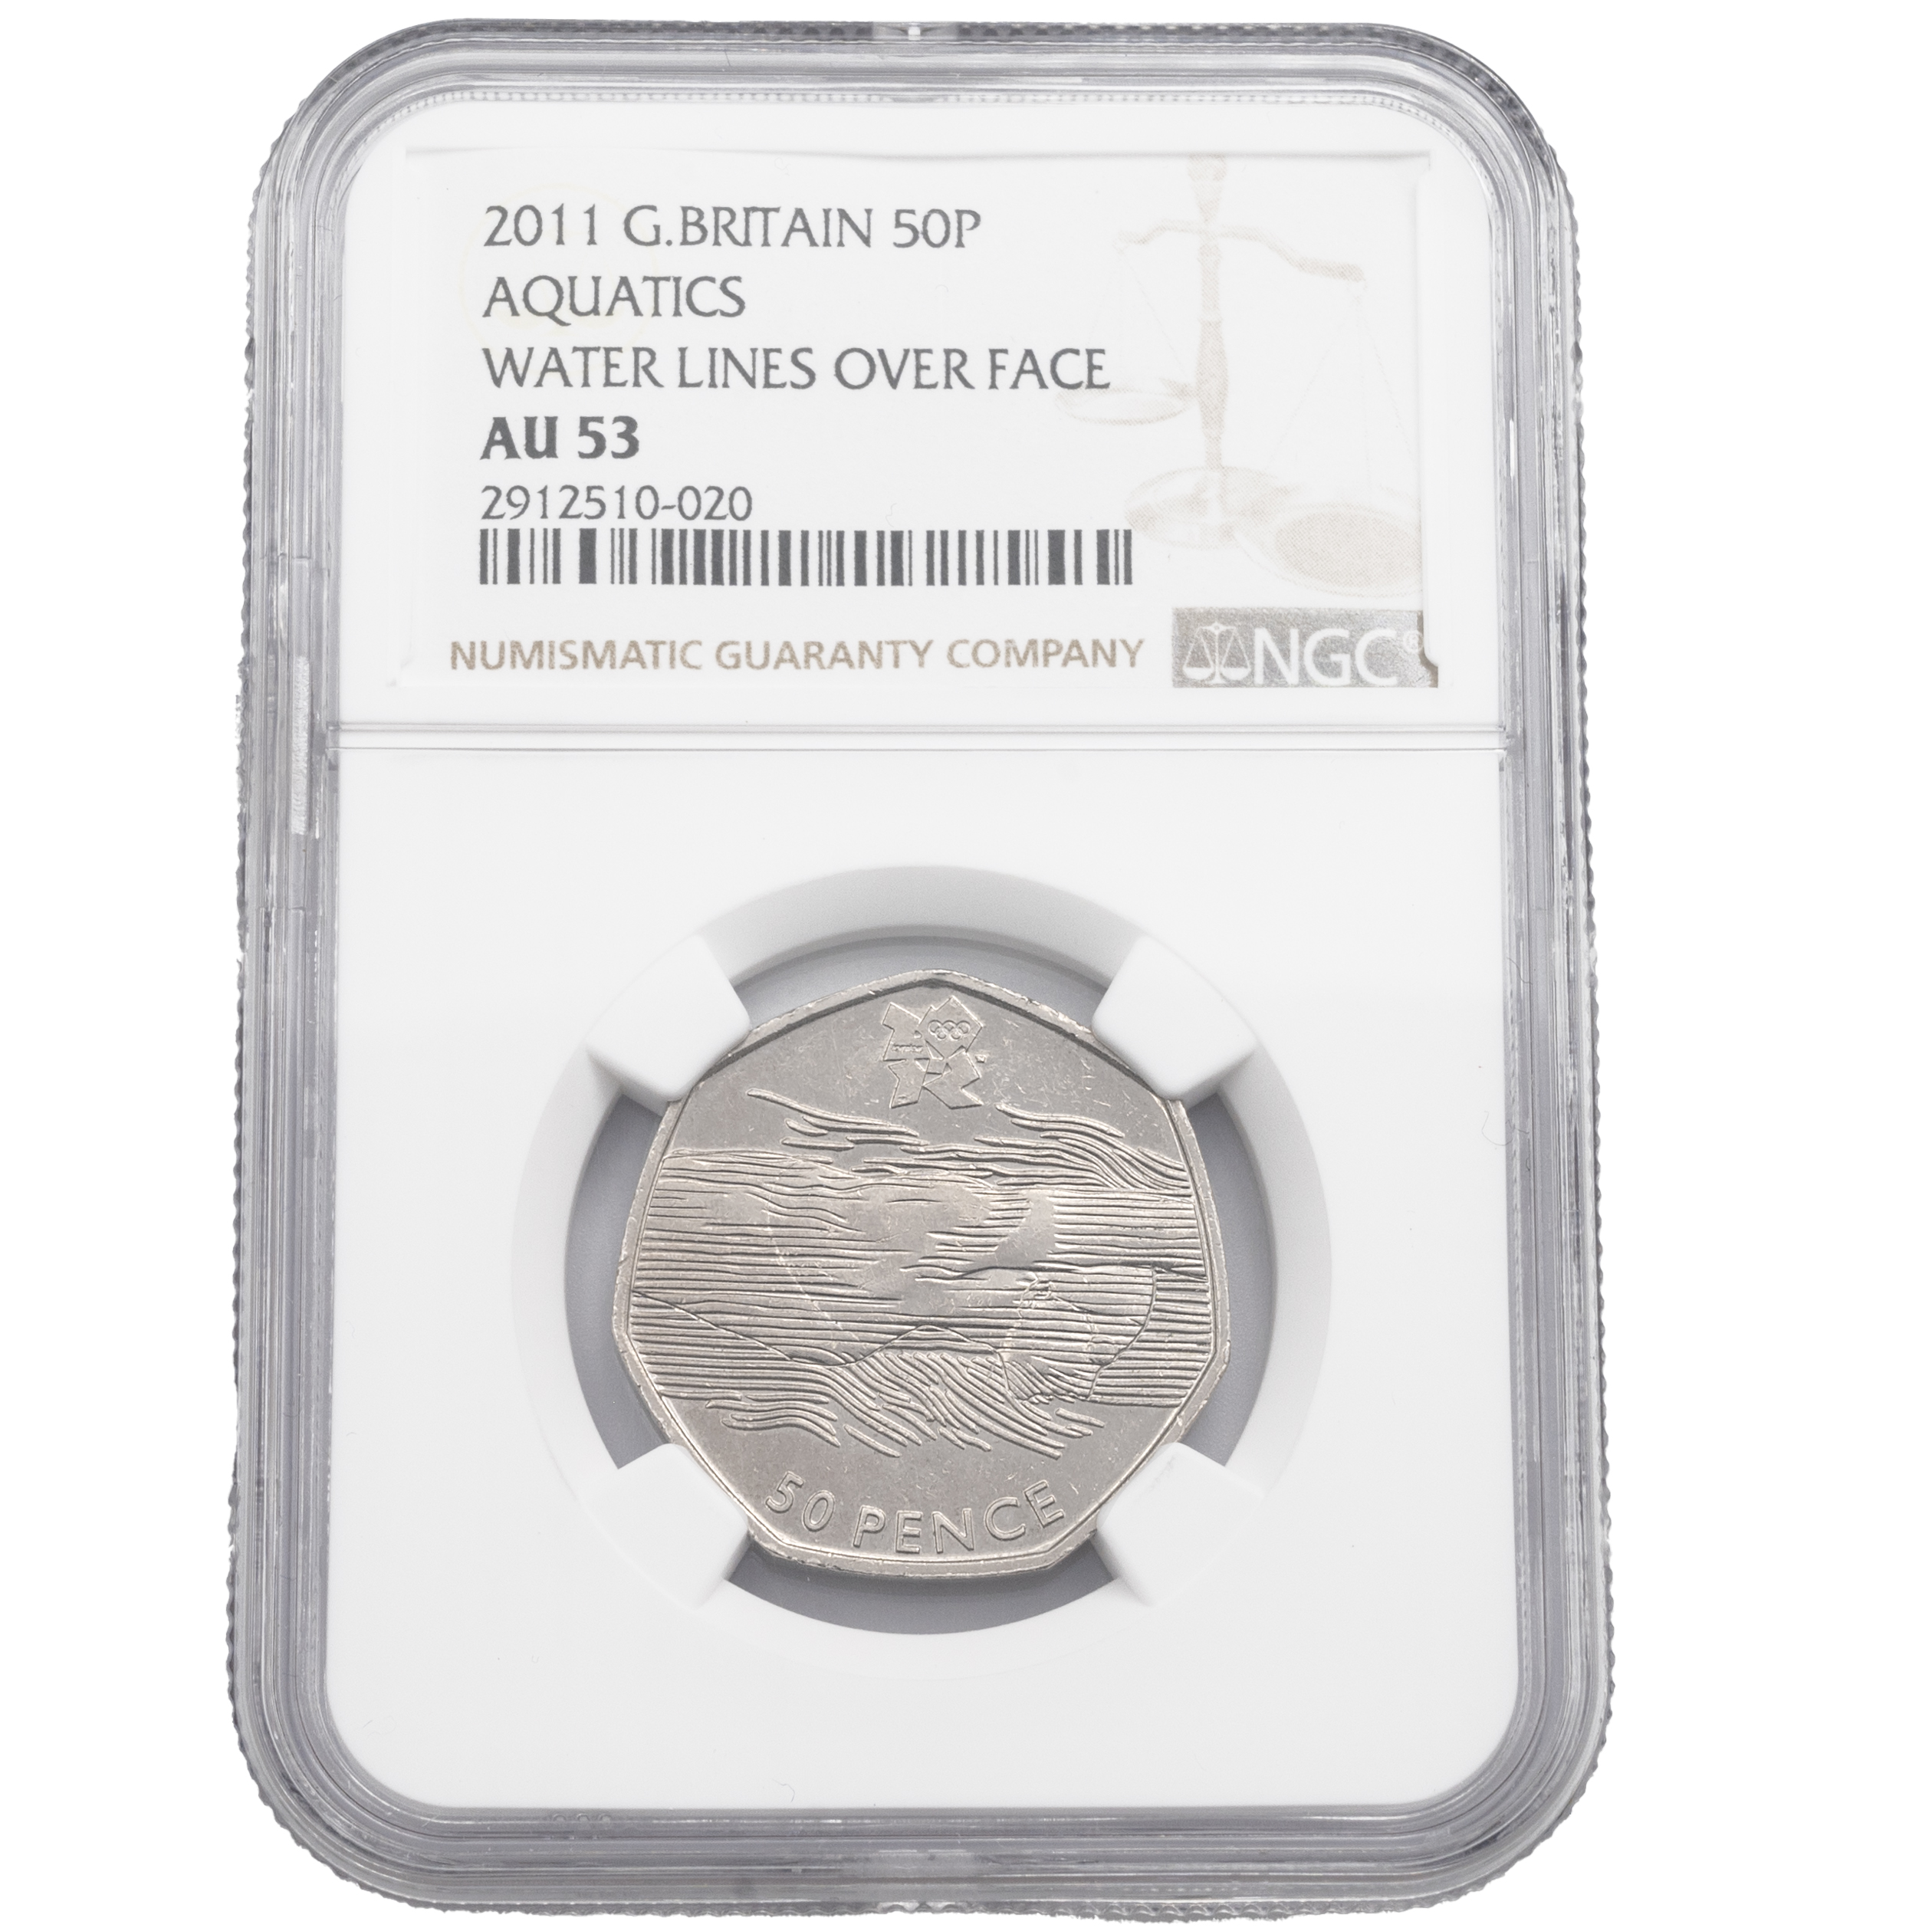 2011 Olympic Aquatics 50p with rare lines over the face variation, graded AU 53 by NGC. Obverse: ...